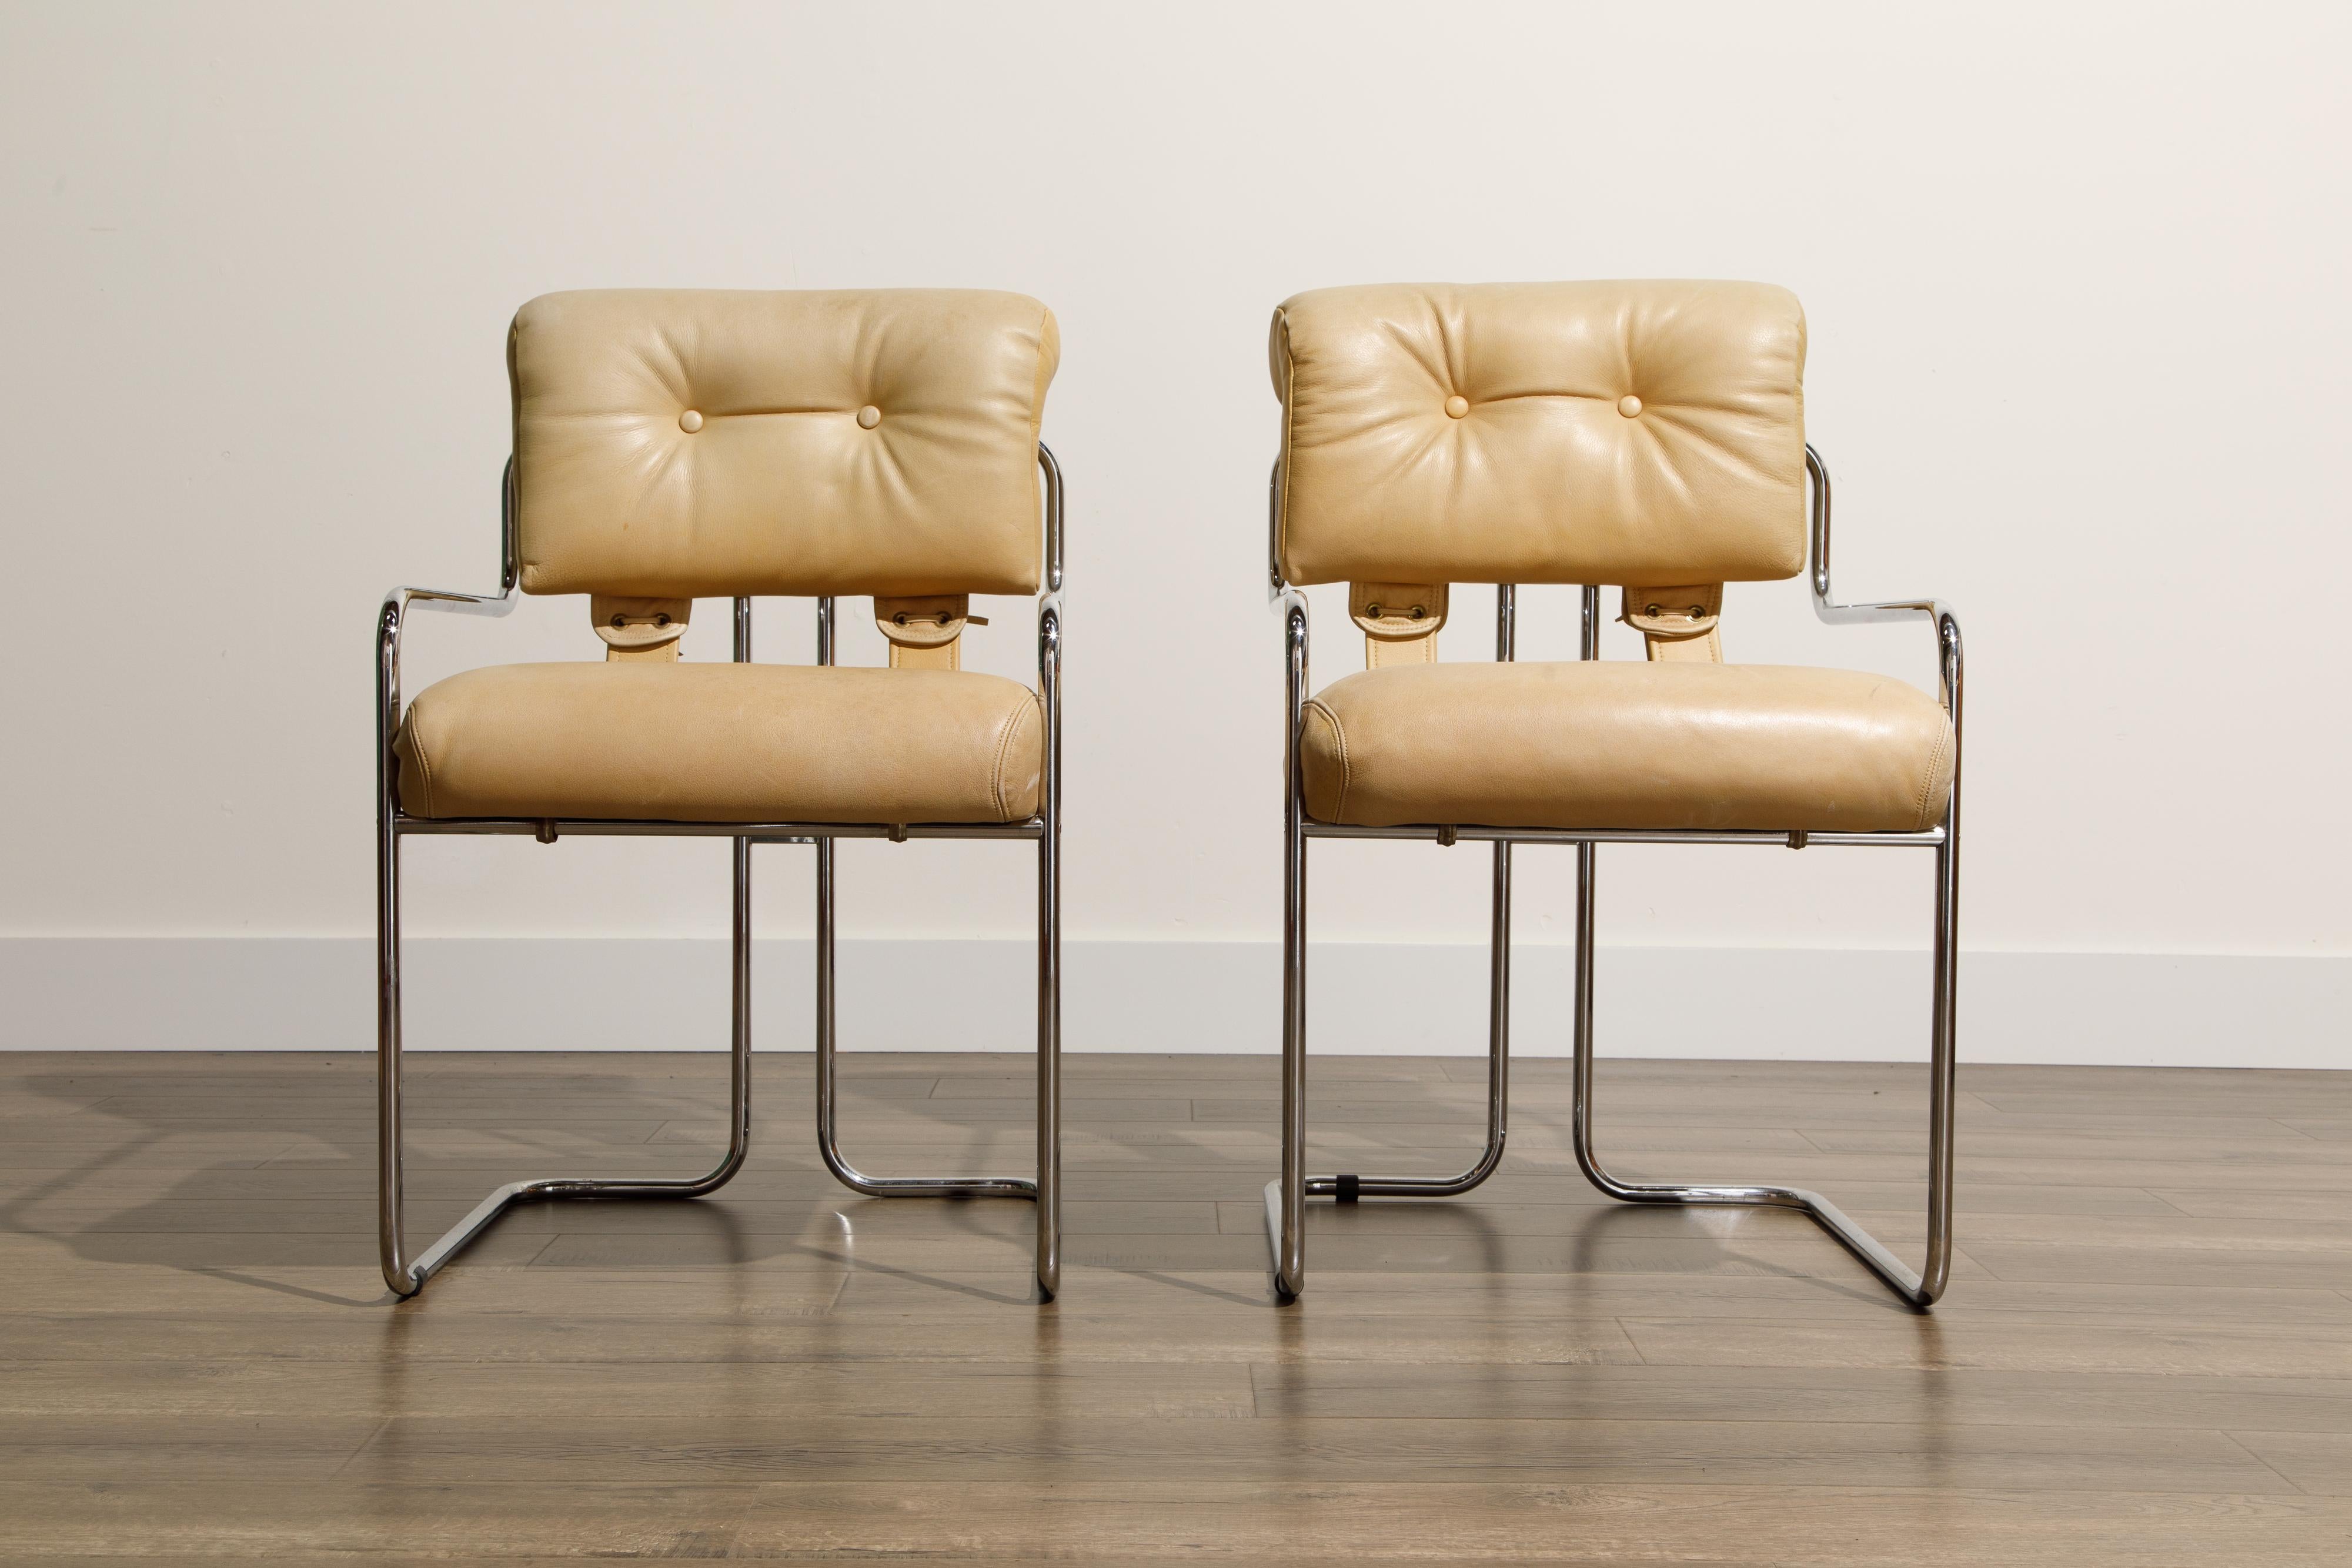 Currently, the most coveted dining chairs by interior designers are 'Tucroma' chairs by Guido Faleschini for i4 Mariani, and we have this incredible pair Tucroma armchairs (priced for the pair) in tan / beige colored leather with lovely patina